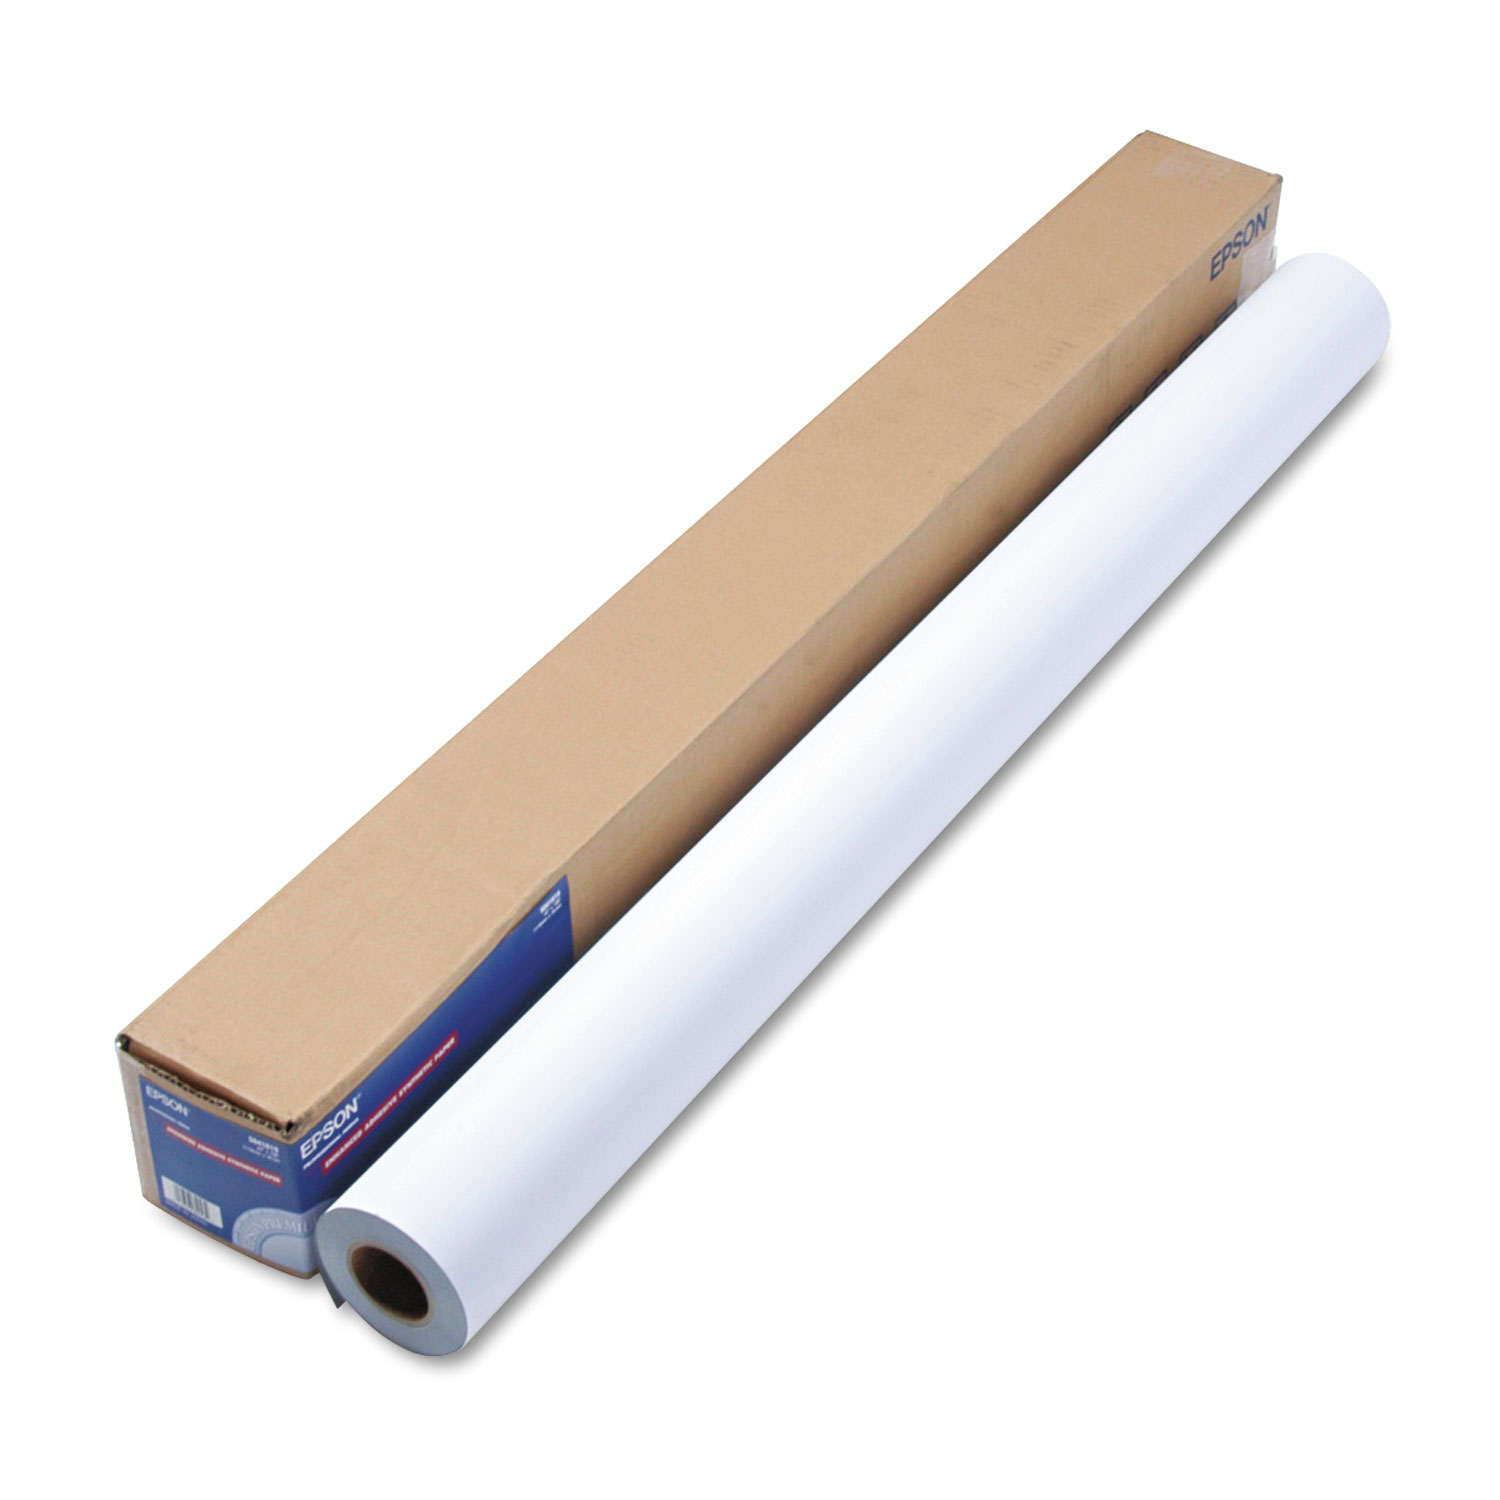  Epson S041619 Enhanced Adhesive Synthetic Paper, 44 x 100 ft, White (EPSS041619) 